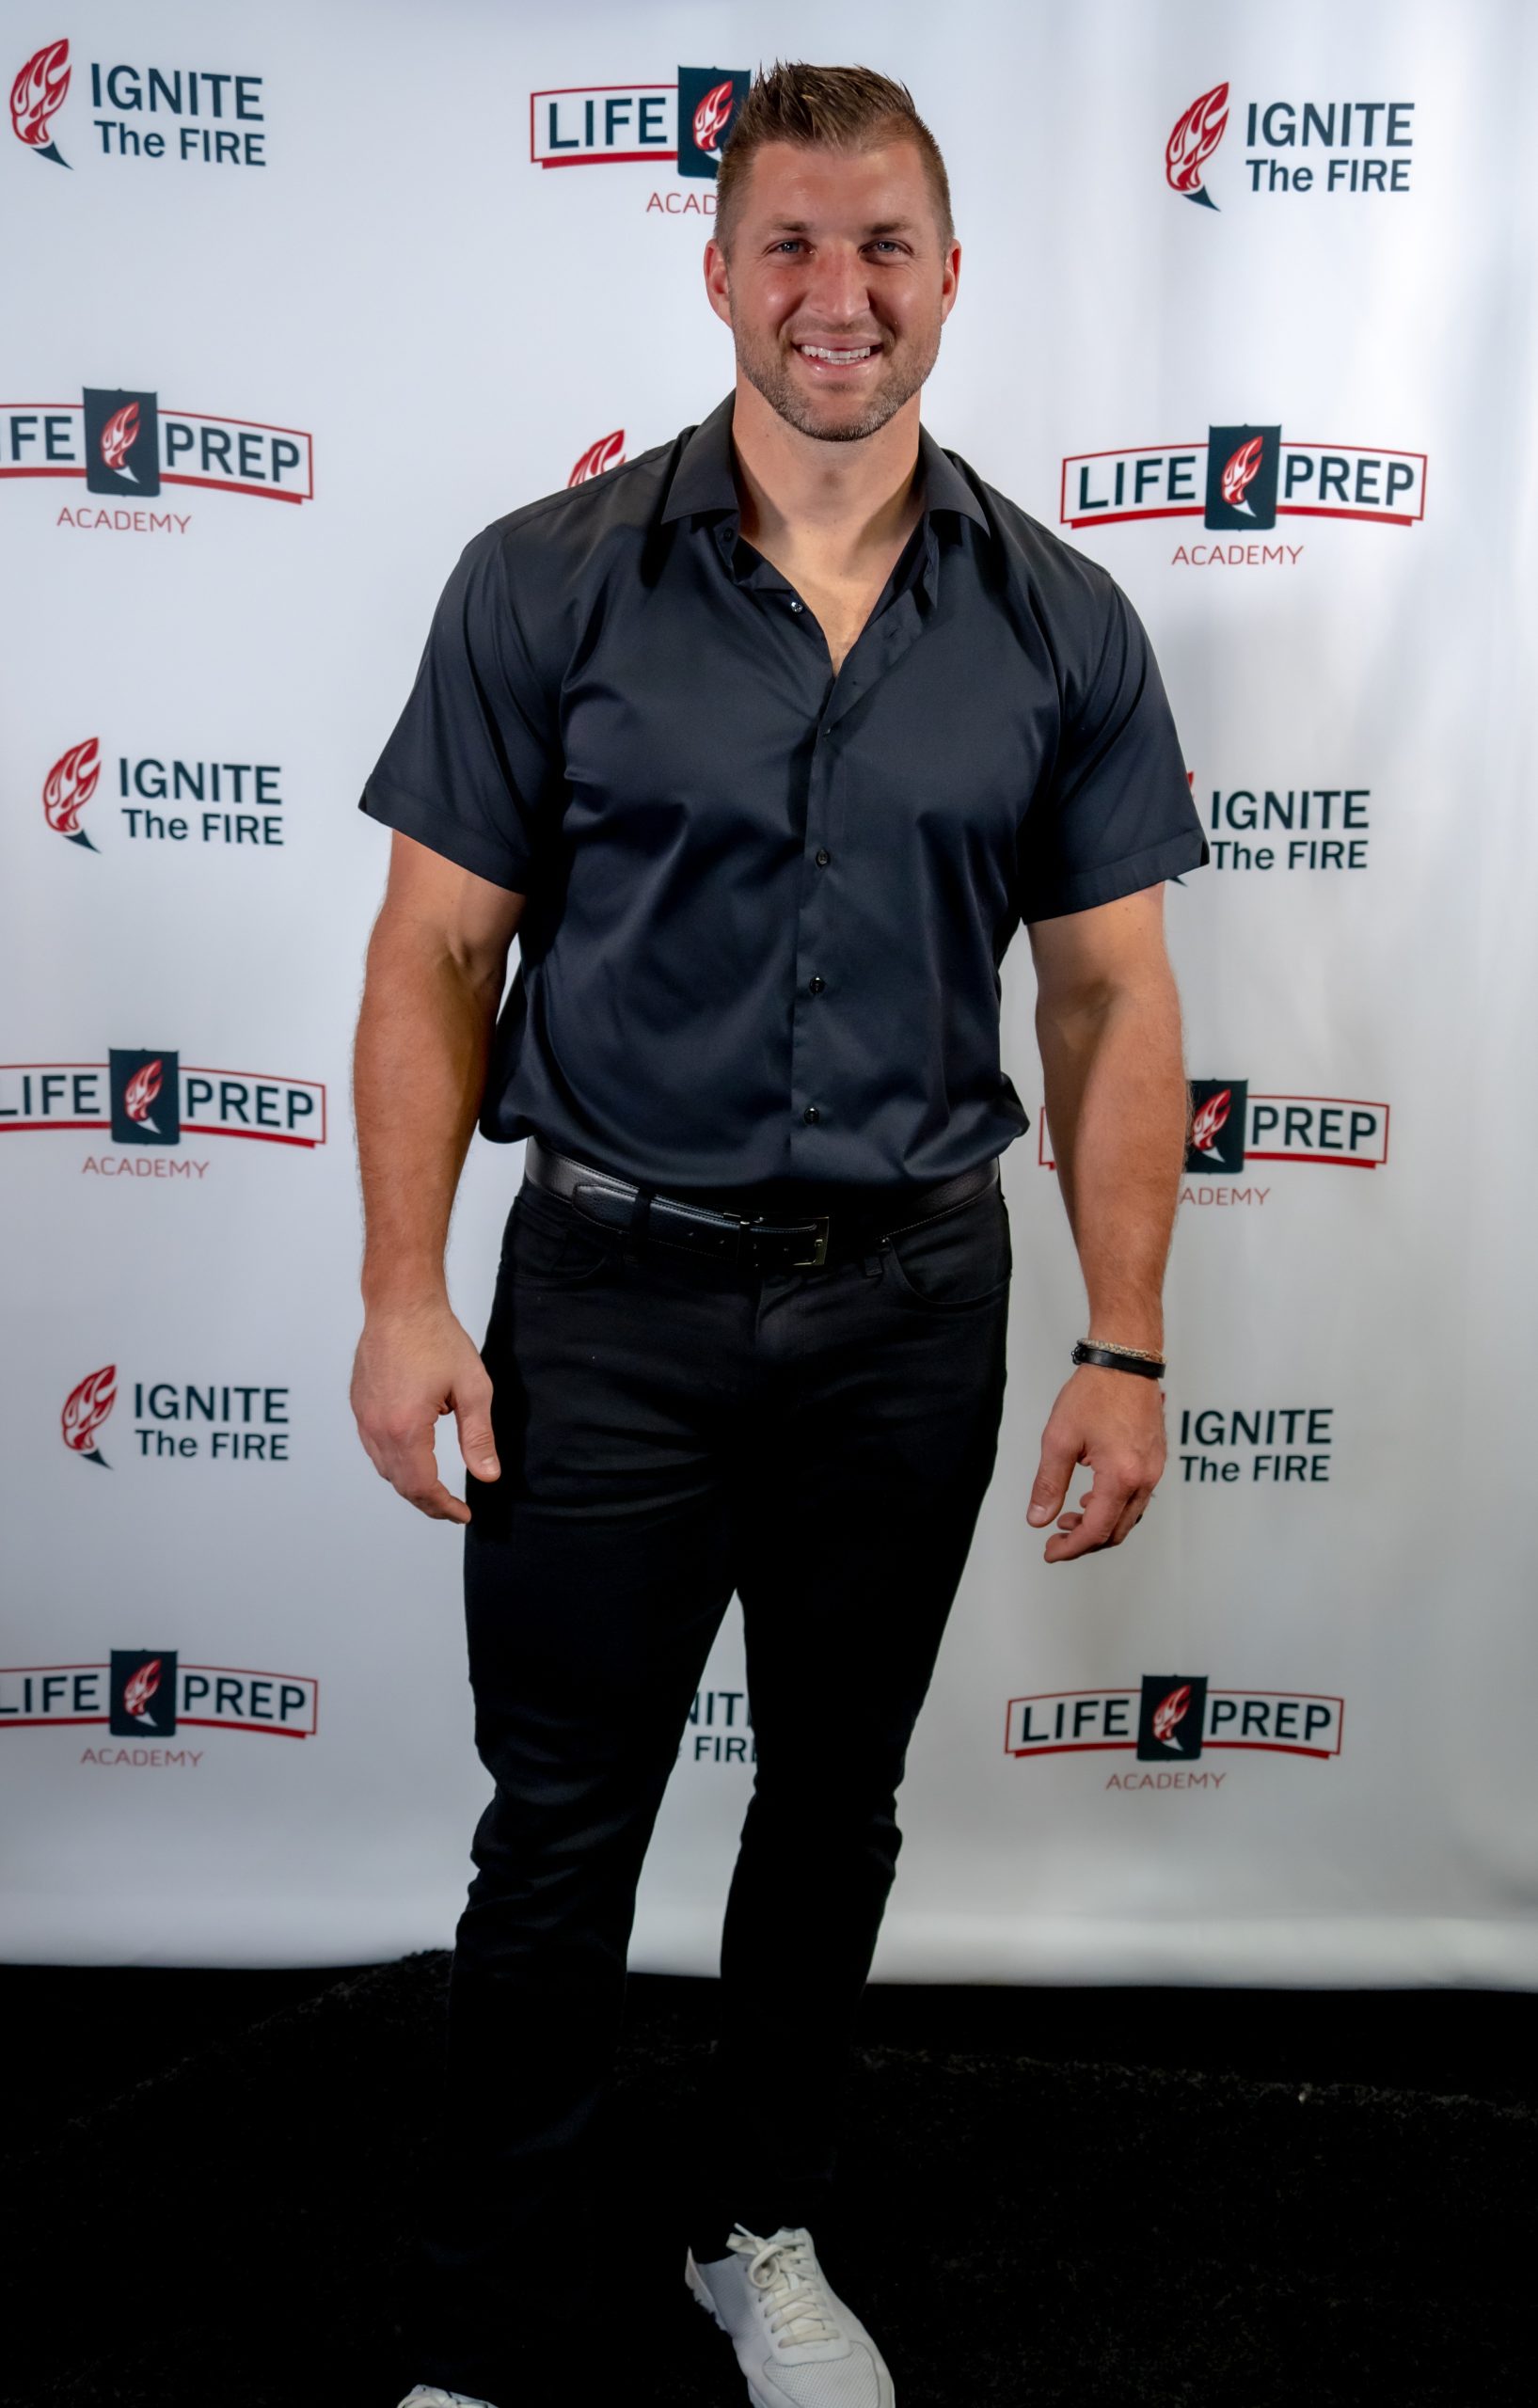 Life Prep Academy IGNITE The FIRE – Tim Tebow VIP Meet and Greet